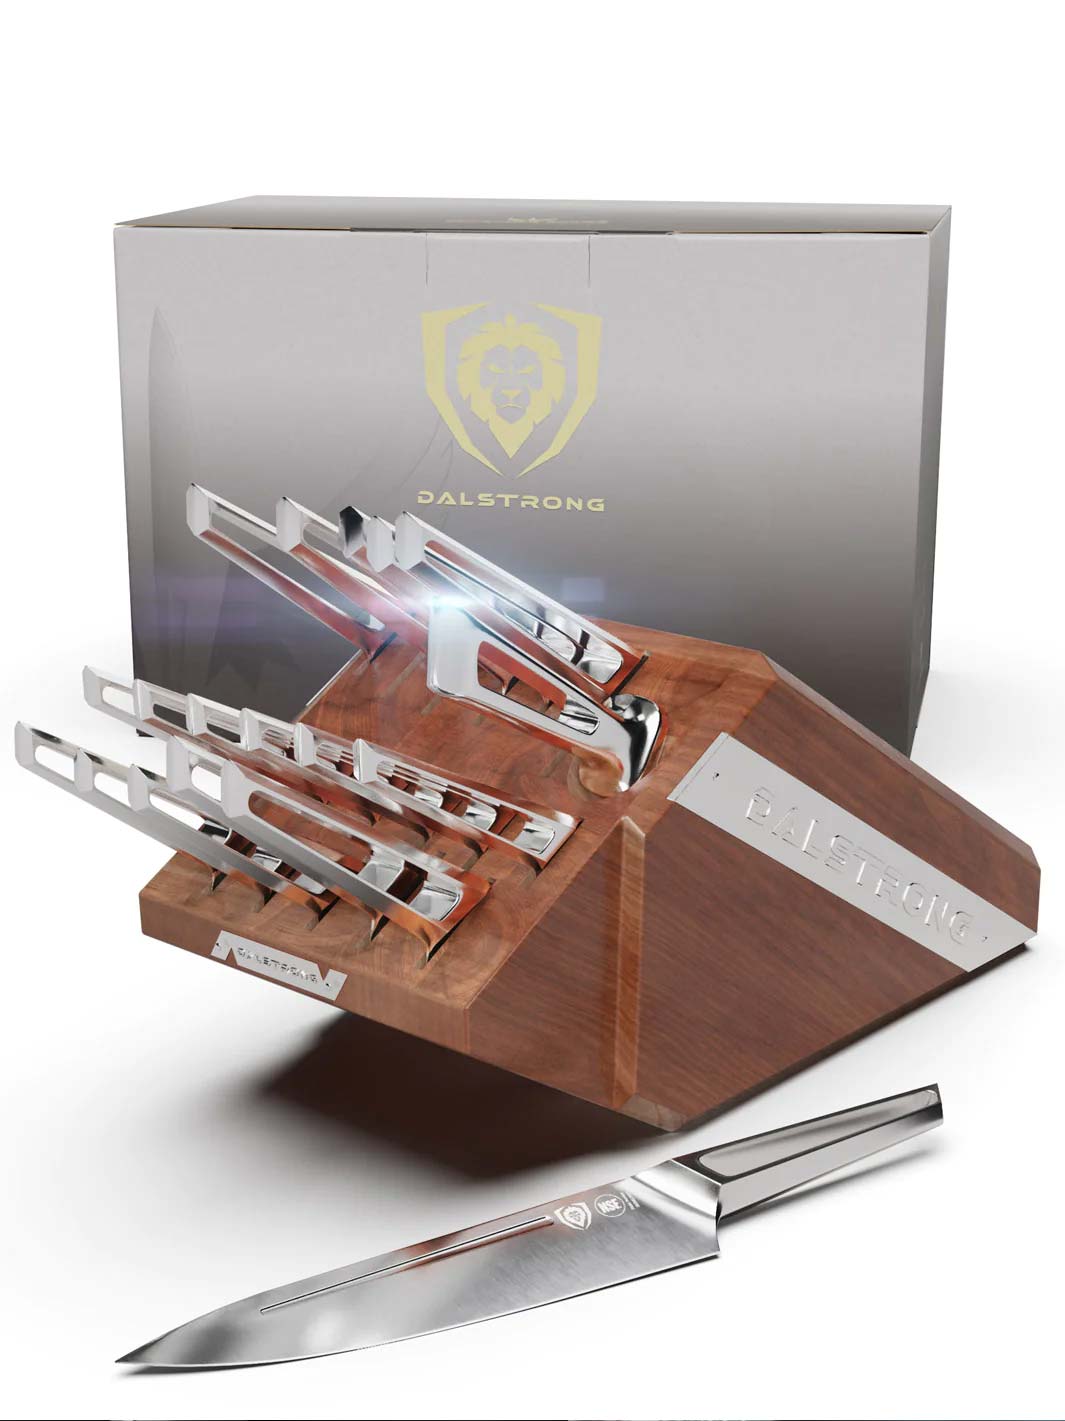 Dalstrong crusader series 18 piece knife block set in front of it's premium packaging.